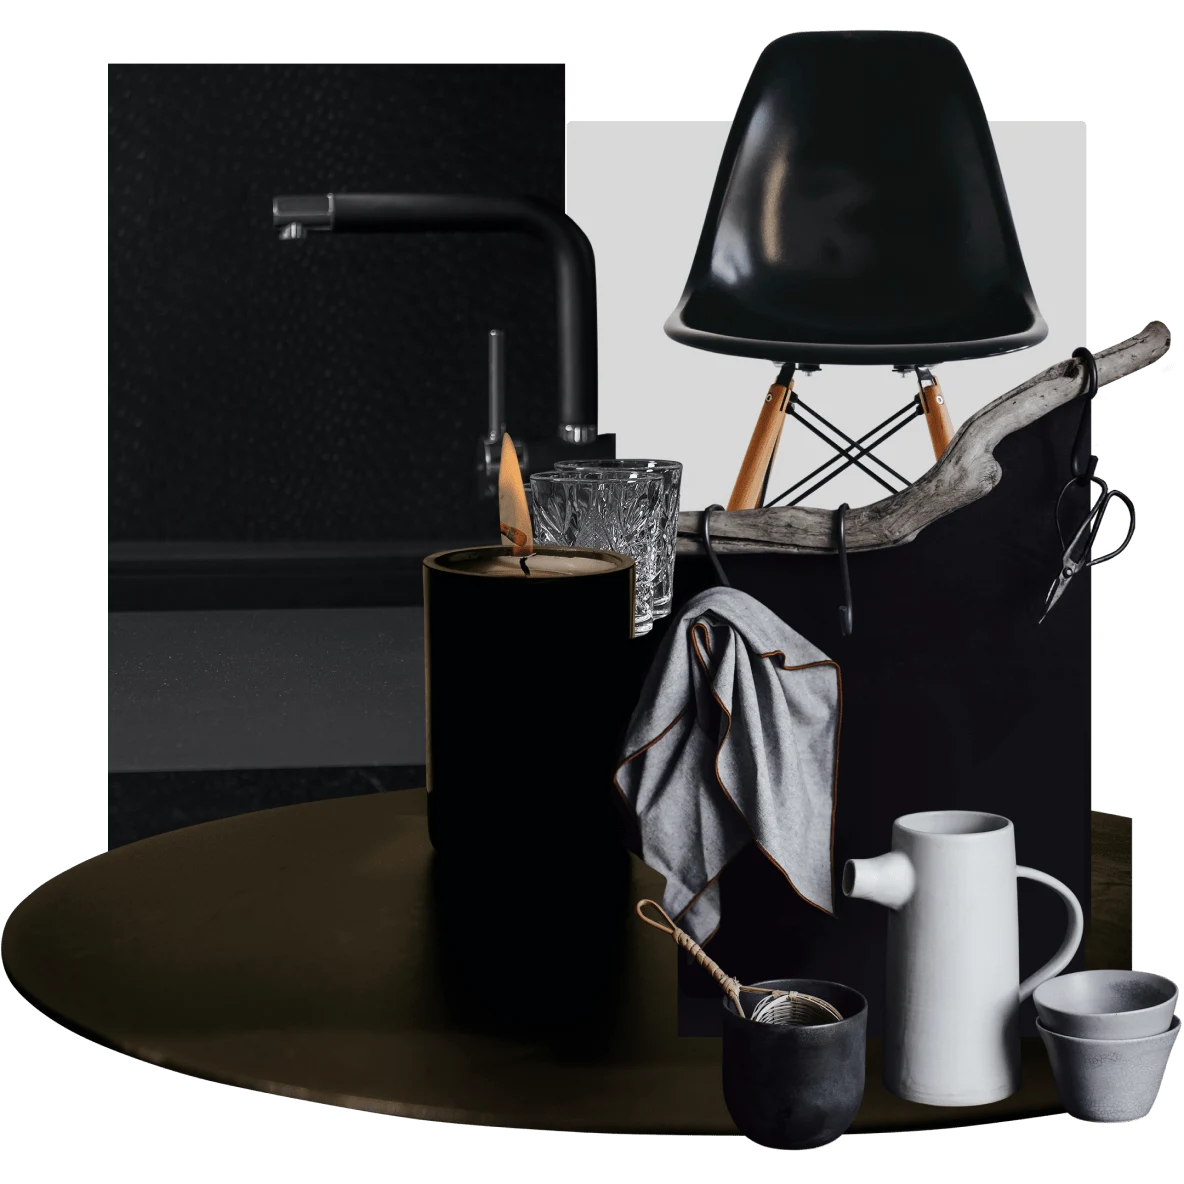 Black candle, white and gray cups on a round black table. Black office chair and black sink fixtures.